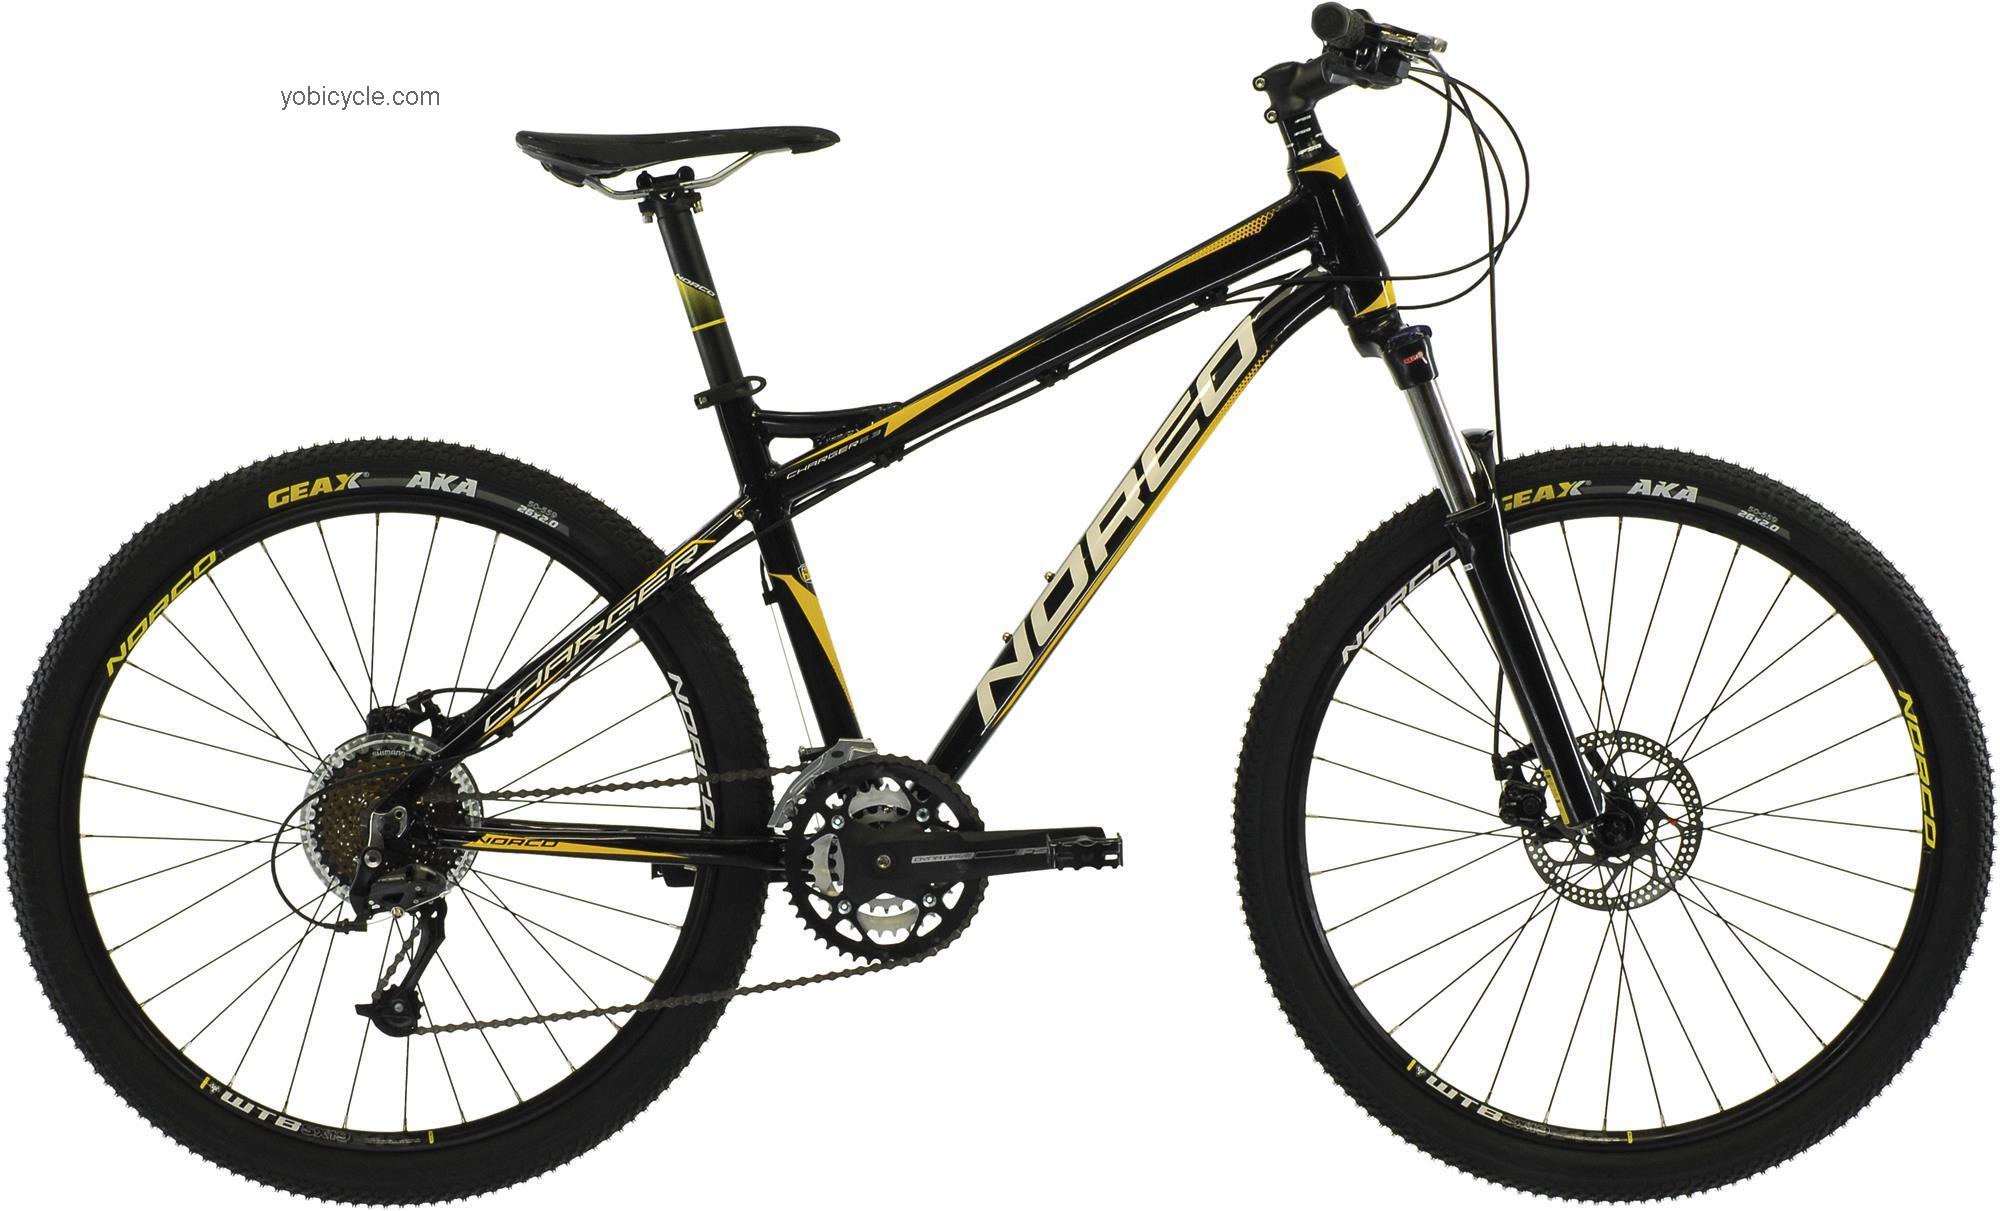 Norco Charger 6.3 2013 comparison online with competitors